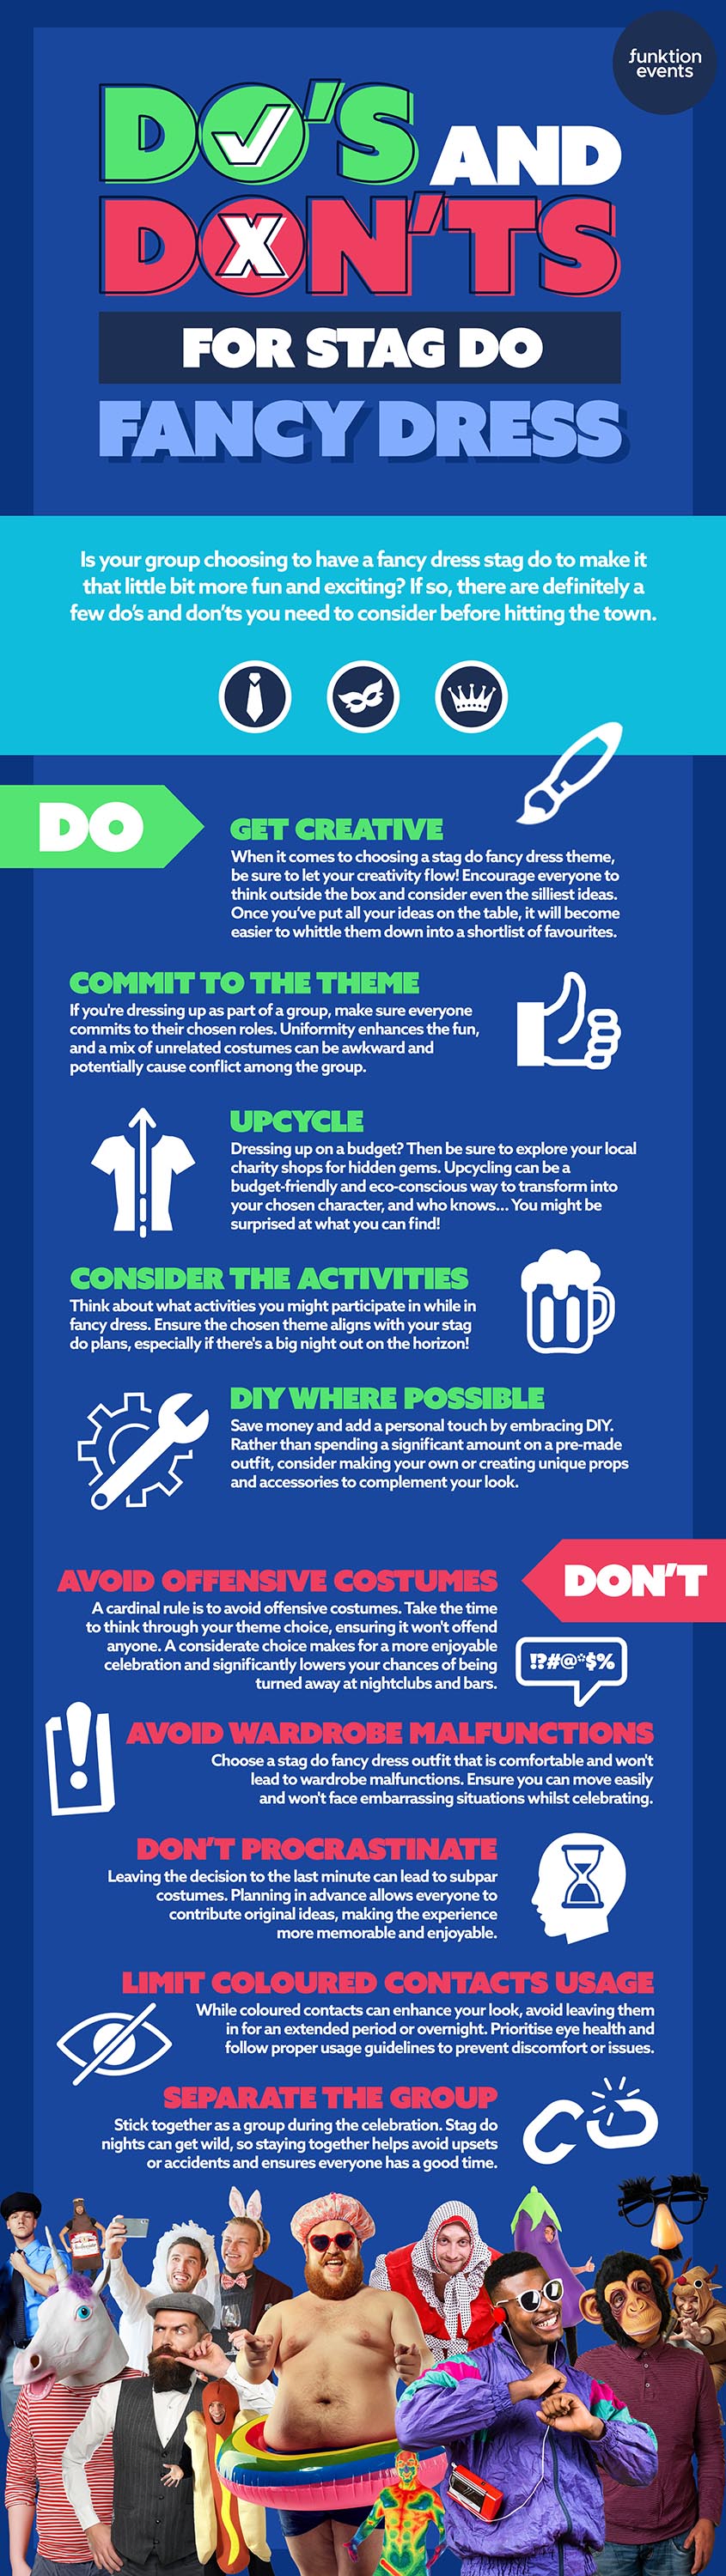 Stag Do Fancy Dress Do's & Don'ts Infographic